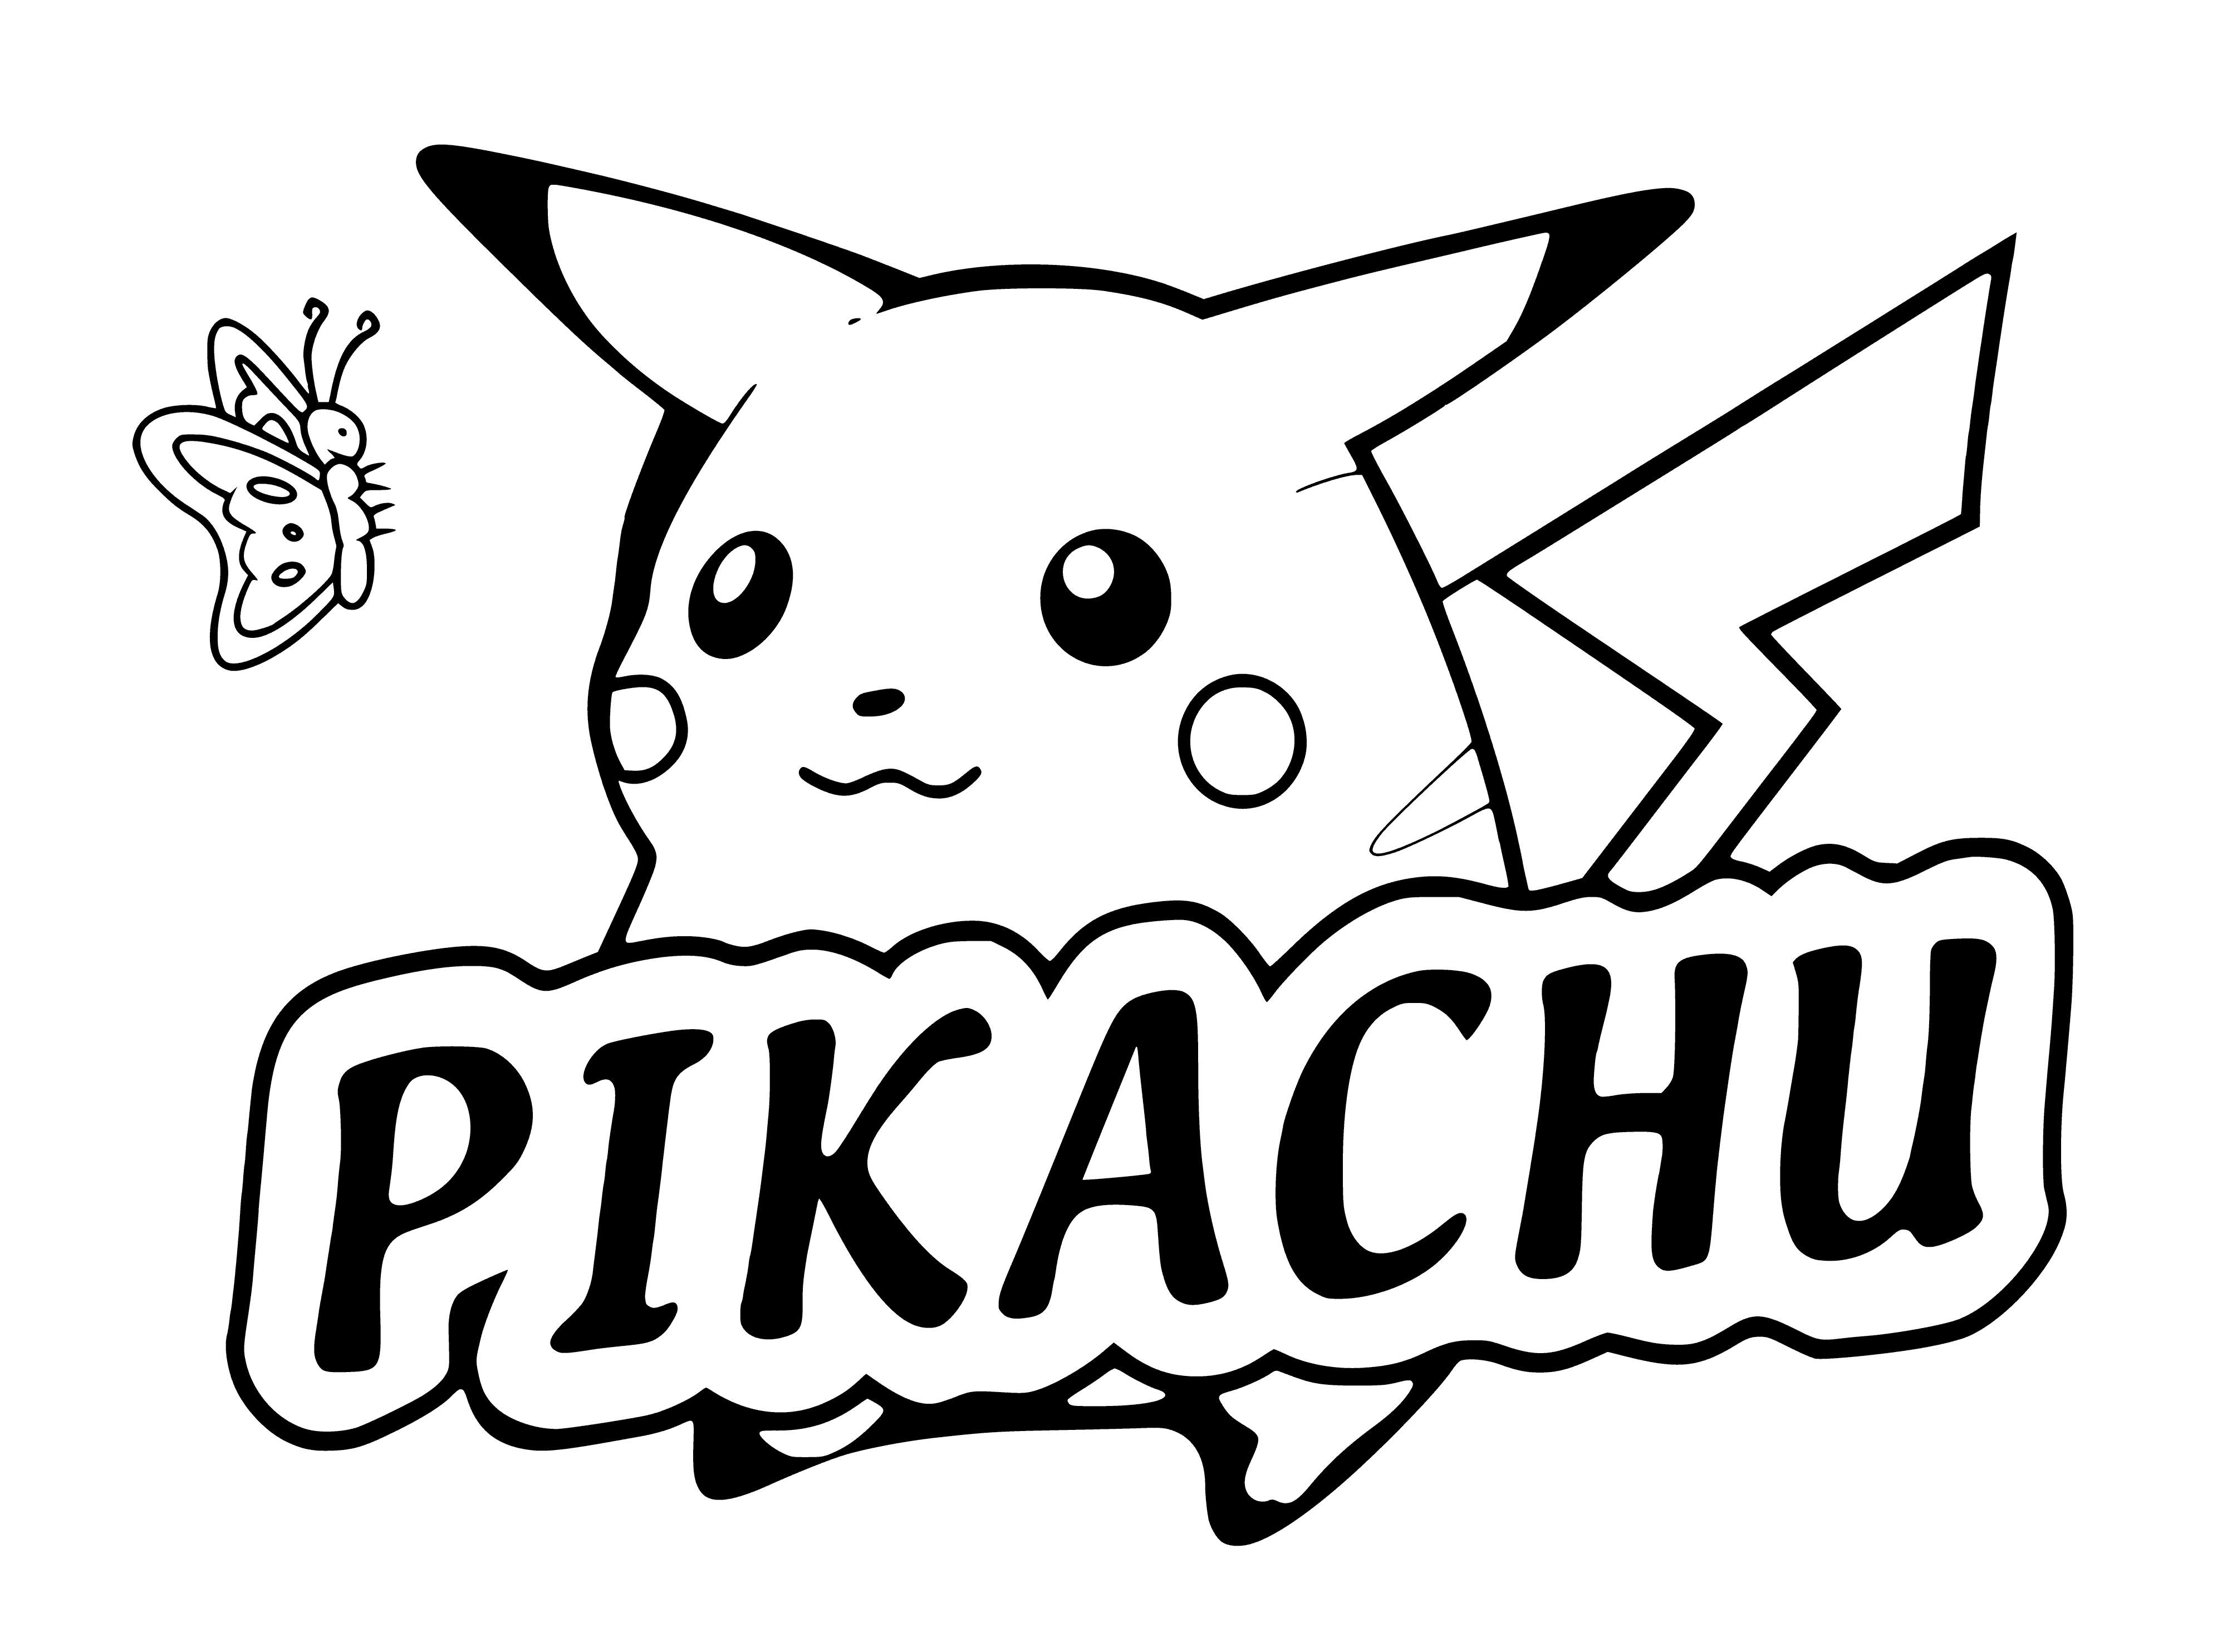 coloring page: Short: Pikachu is a yellow rodent Pokemon with lightning-shaped stripes, small mouth, long ears with black tips, & brown eyes. Has light yellow belly & long tail with black tip. It's small, but the tail adds an extra foot to its height.